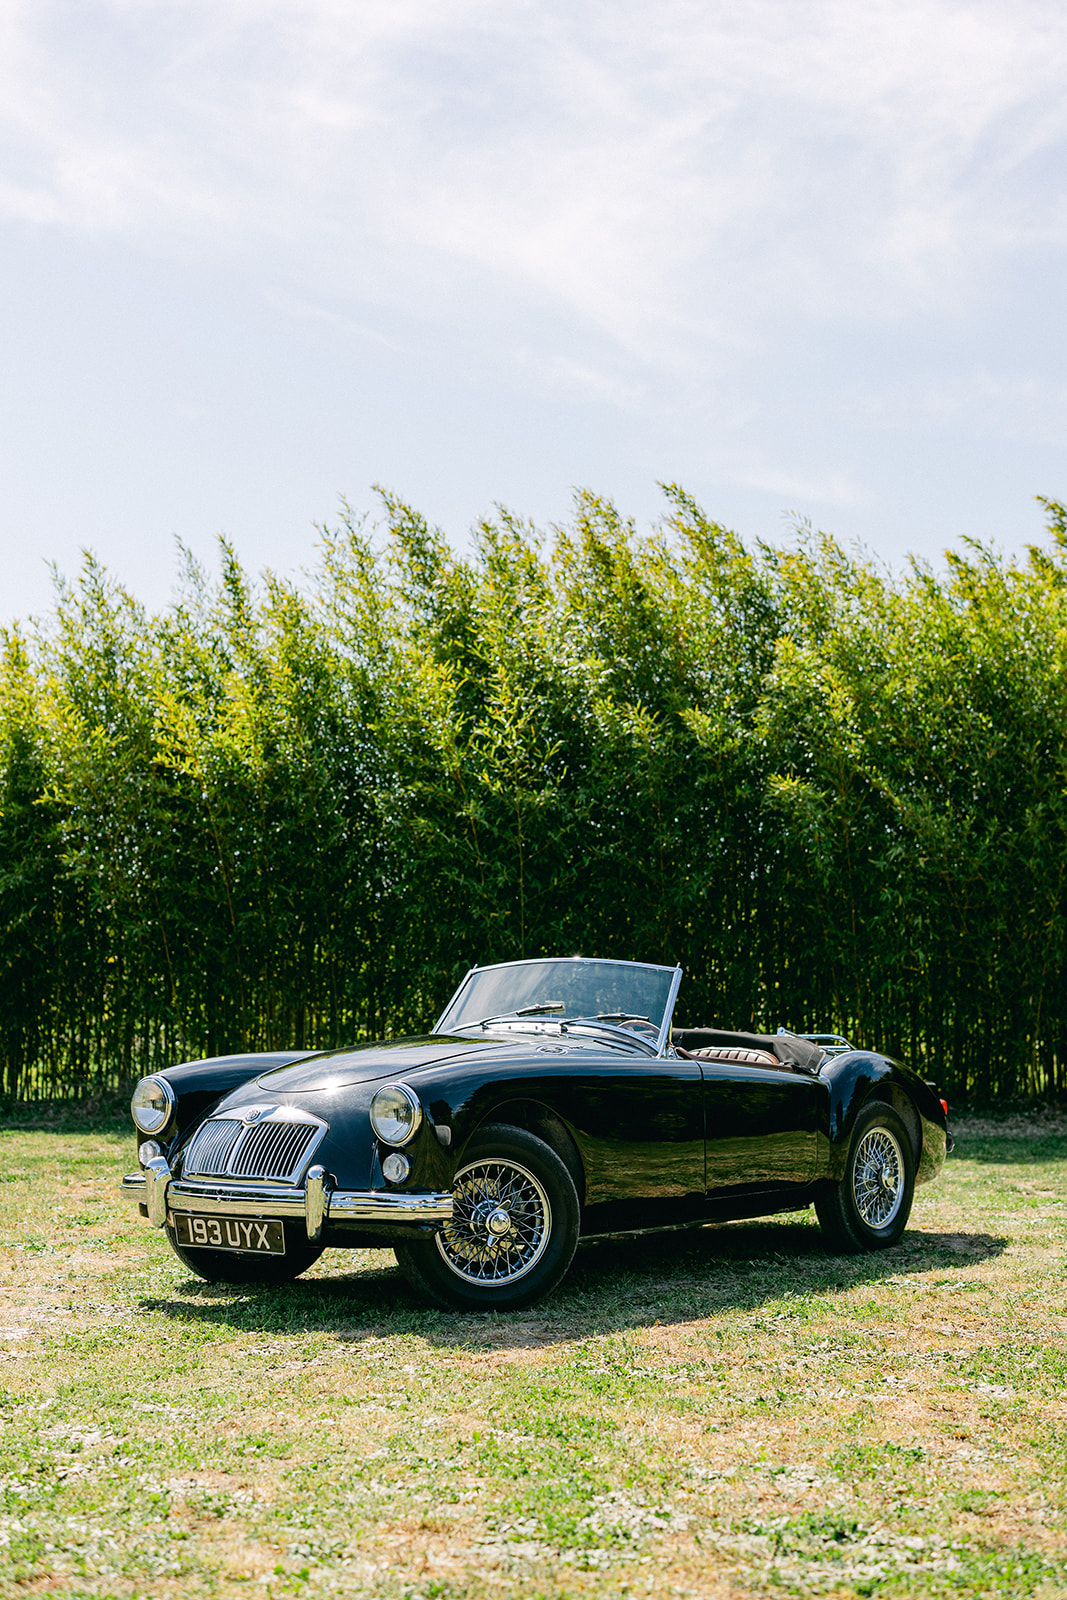 A photopraph of one of the vehicles available for day rental at Provence Classics.